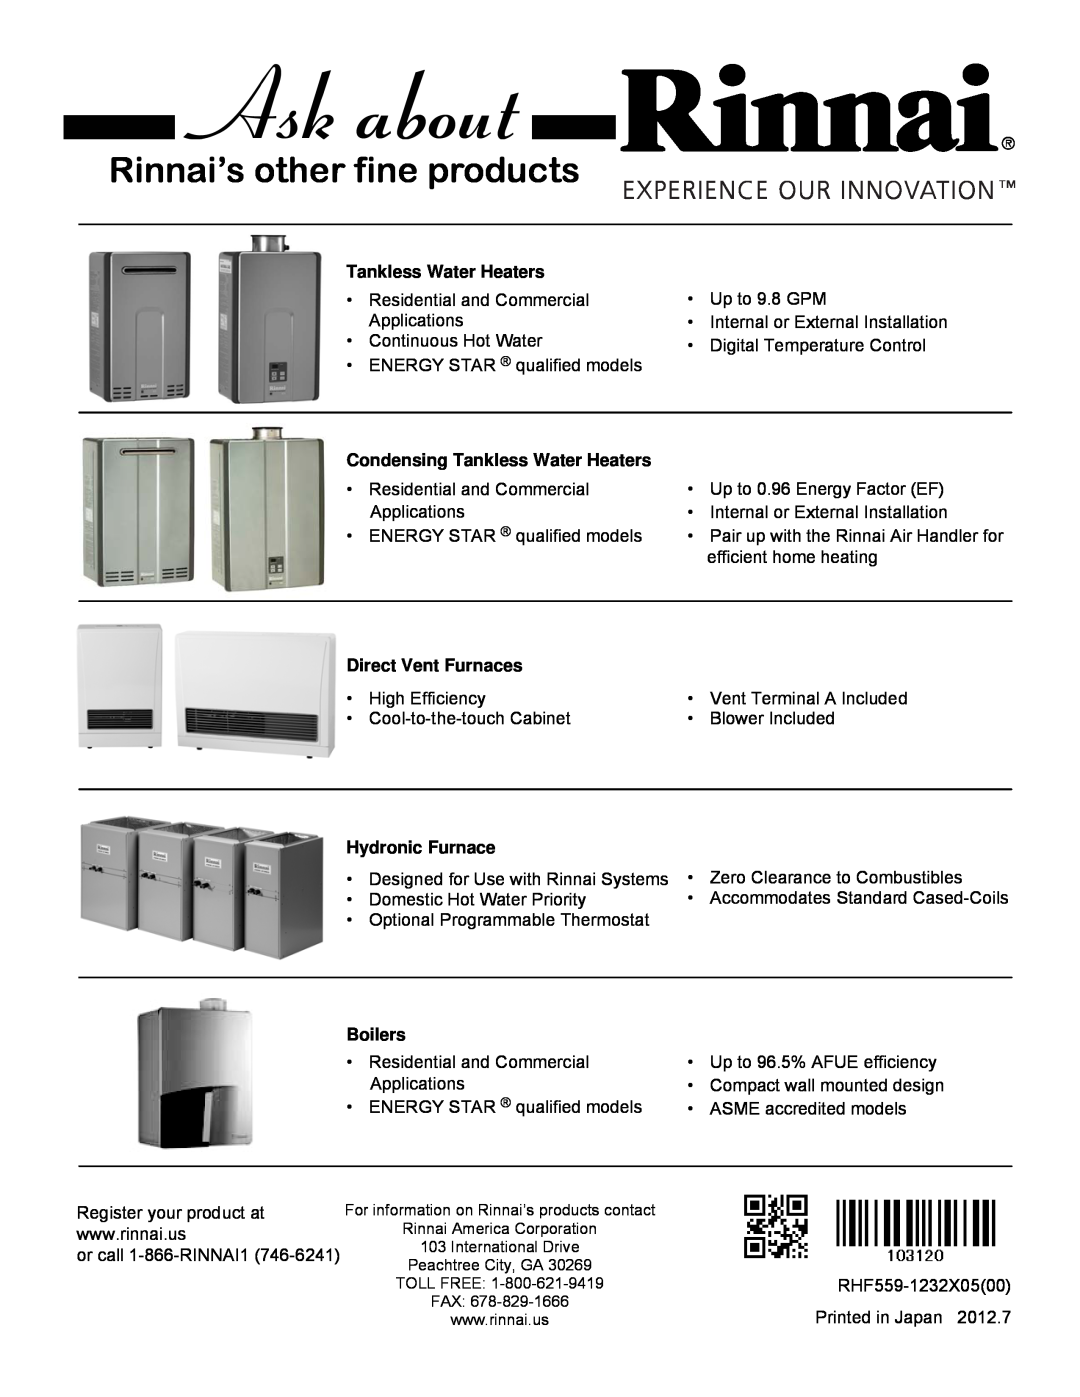 Rinnai EX22C (RHFE-559FTA) Rinnai’s other fine products, Condensing Tankless Water Heaters, Direct Vent Furnaces 